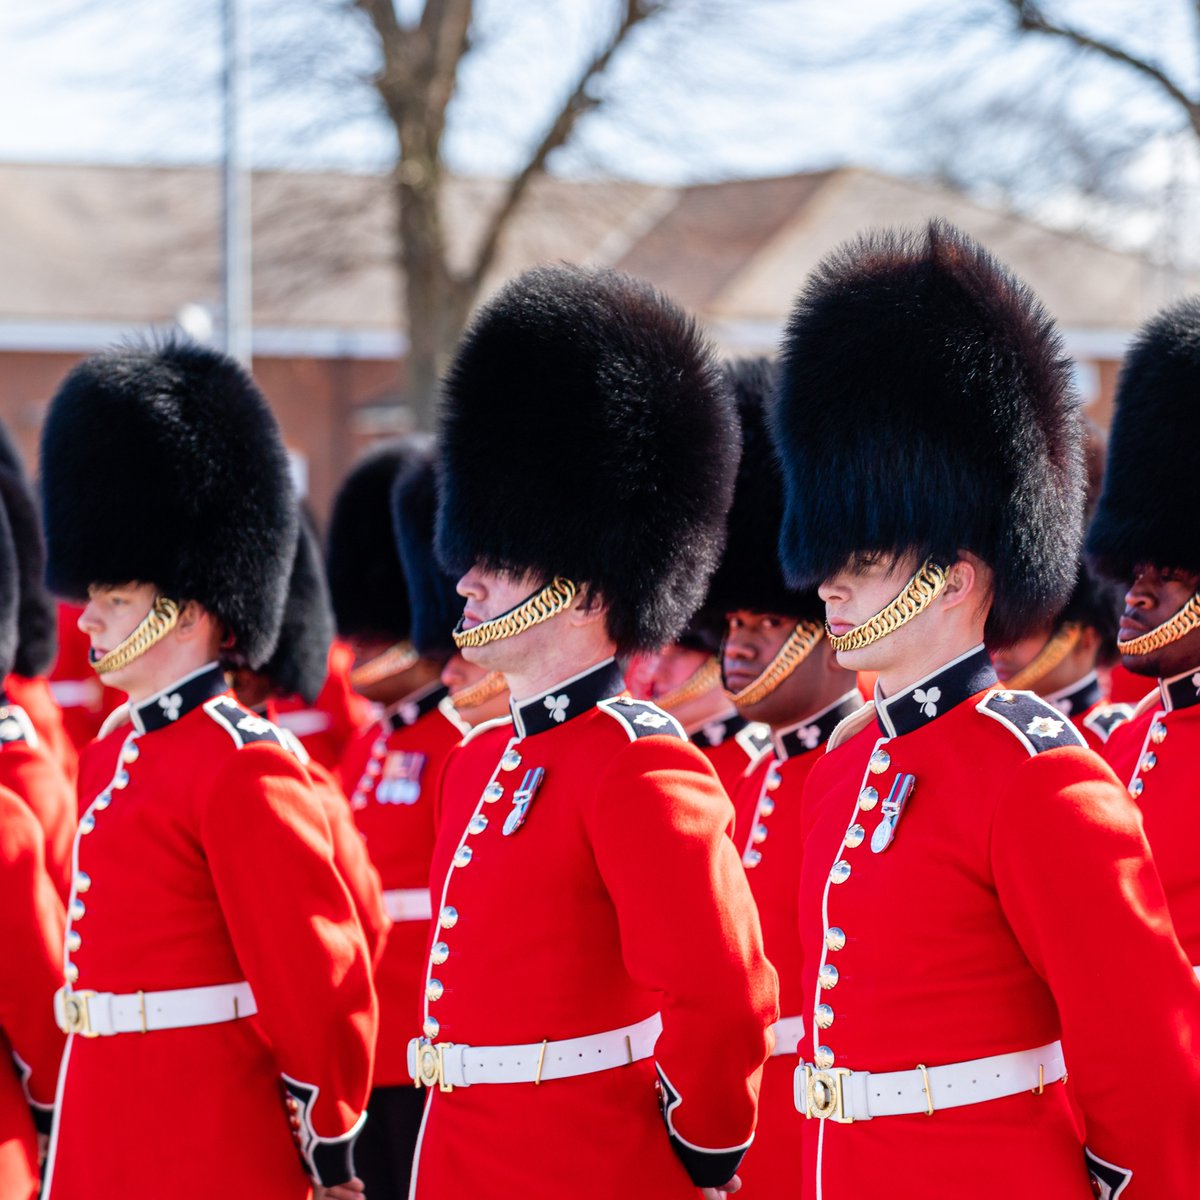 “Today we celebrate our 123rd birthday, up the Micks!”

Quis Separabit

#IrishGuards☘️💂#BritishArmy #TheGuards
#IG #ArmyLife #Soldier #ProtectingOurNation #CourageAndCommitment
#WeAreTheBritishArmy #ProudToServe #ArmyFamily #ServiceBeforeSelf
#StrongerTogether #HappyBirthday